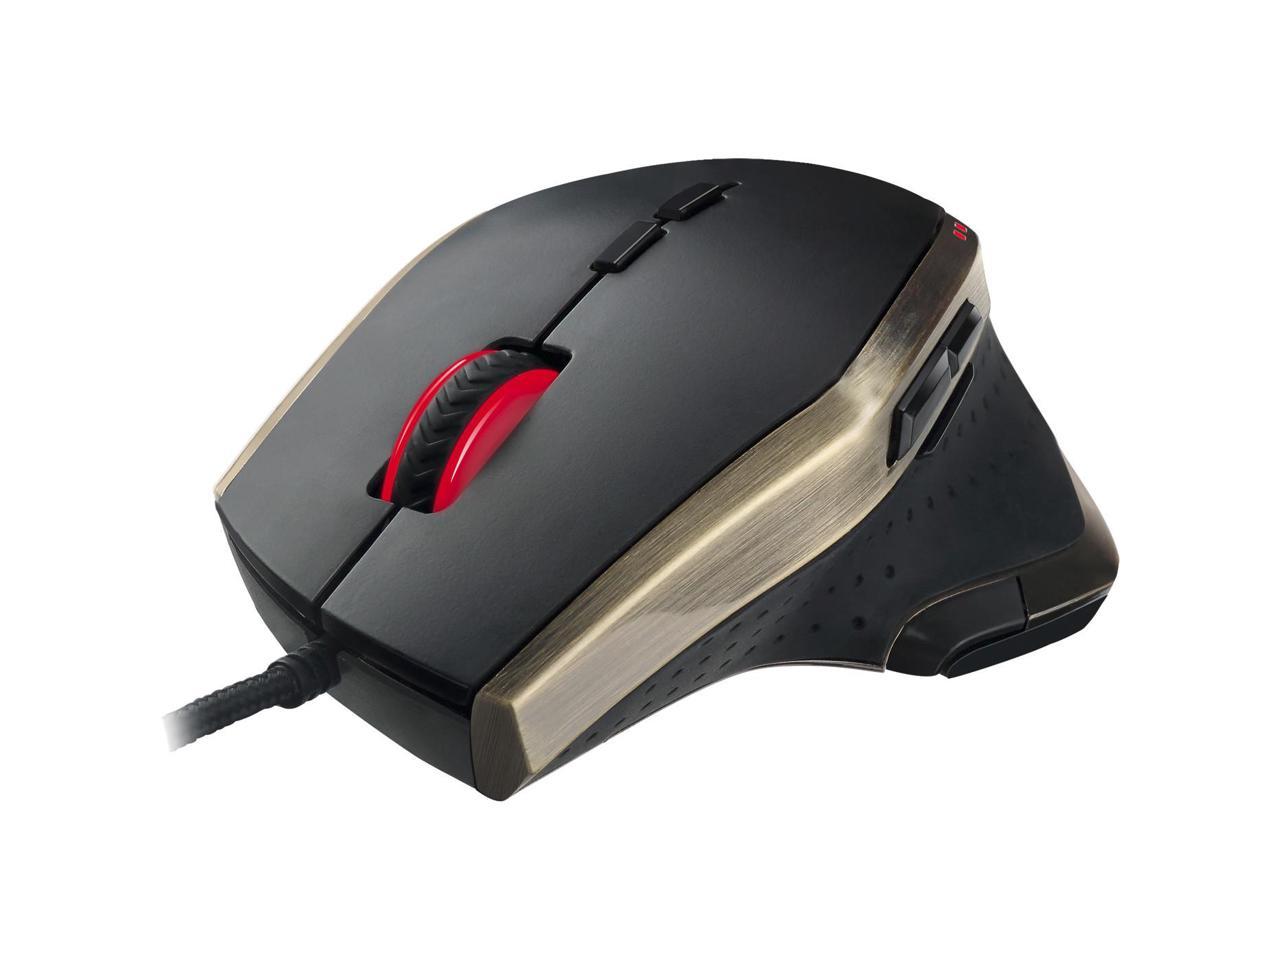 Adesso iMouse X3 Multi-Color Programmable Gaming Mouse